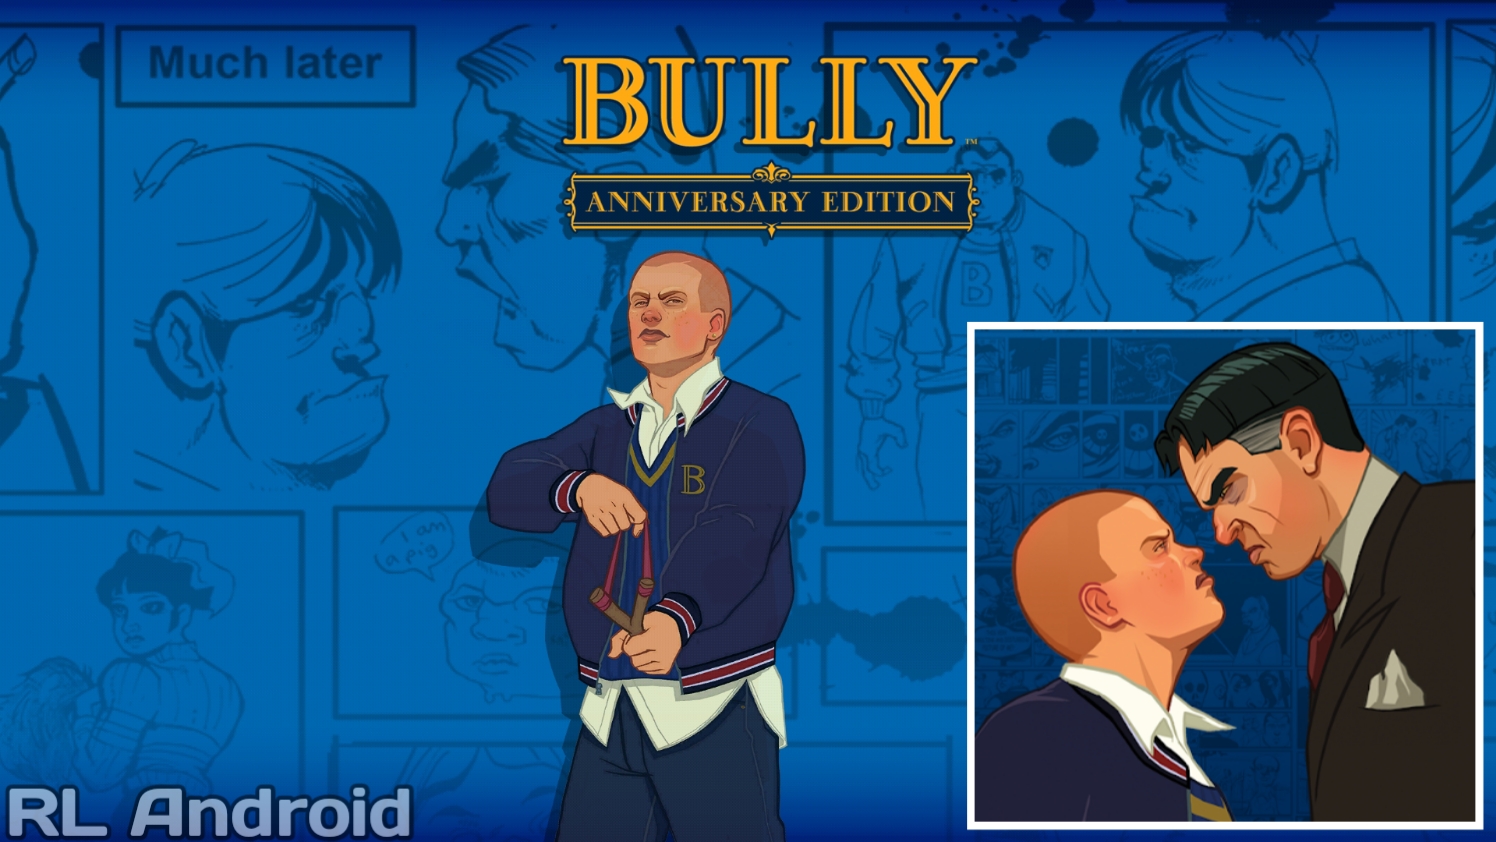 bully anniversary edition apk mod download